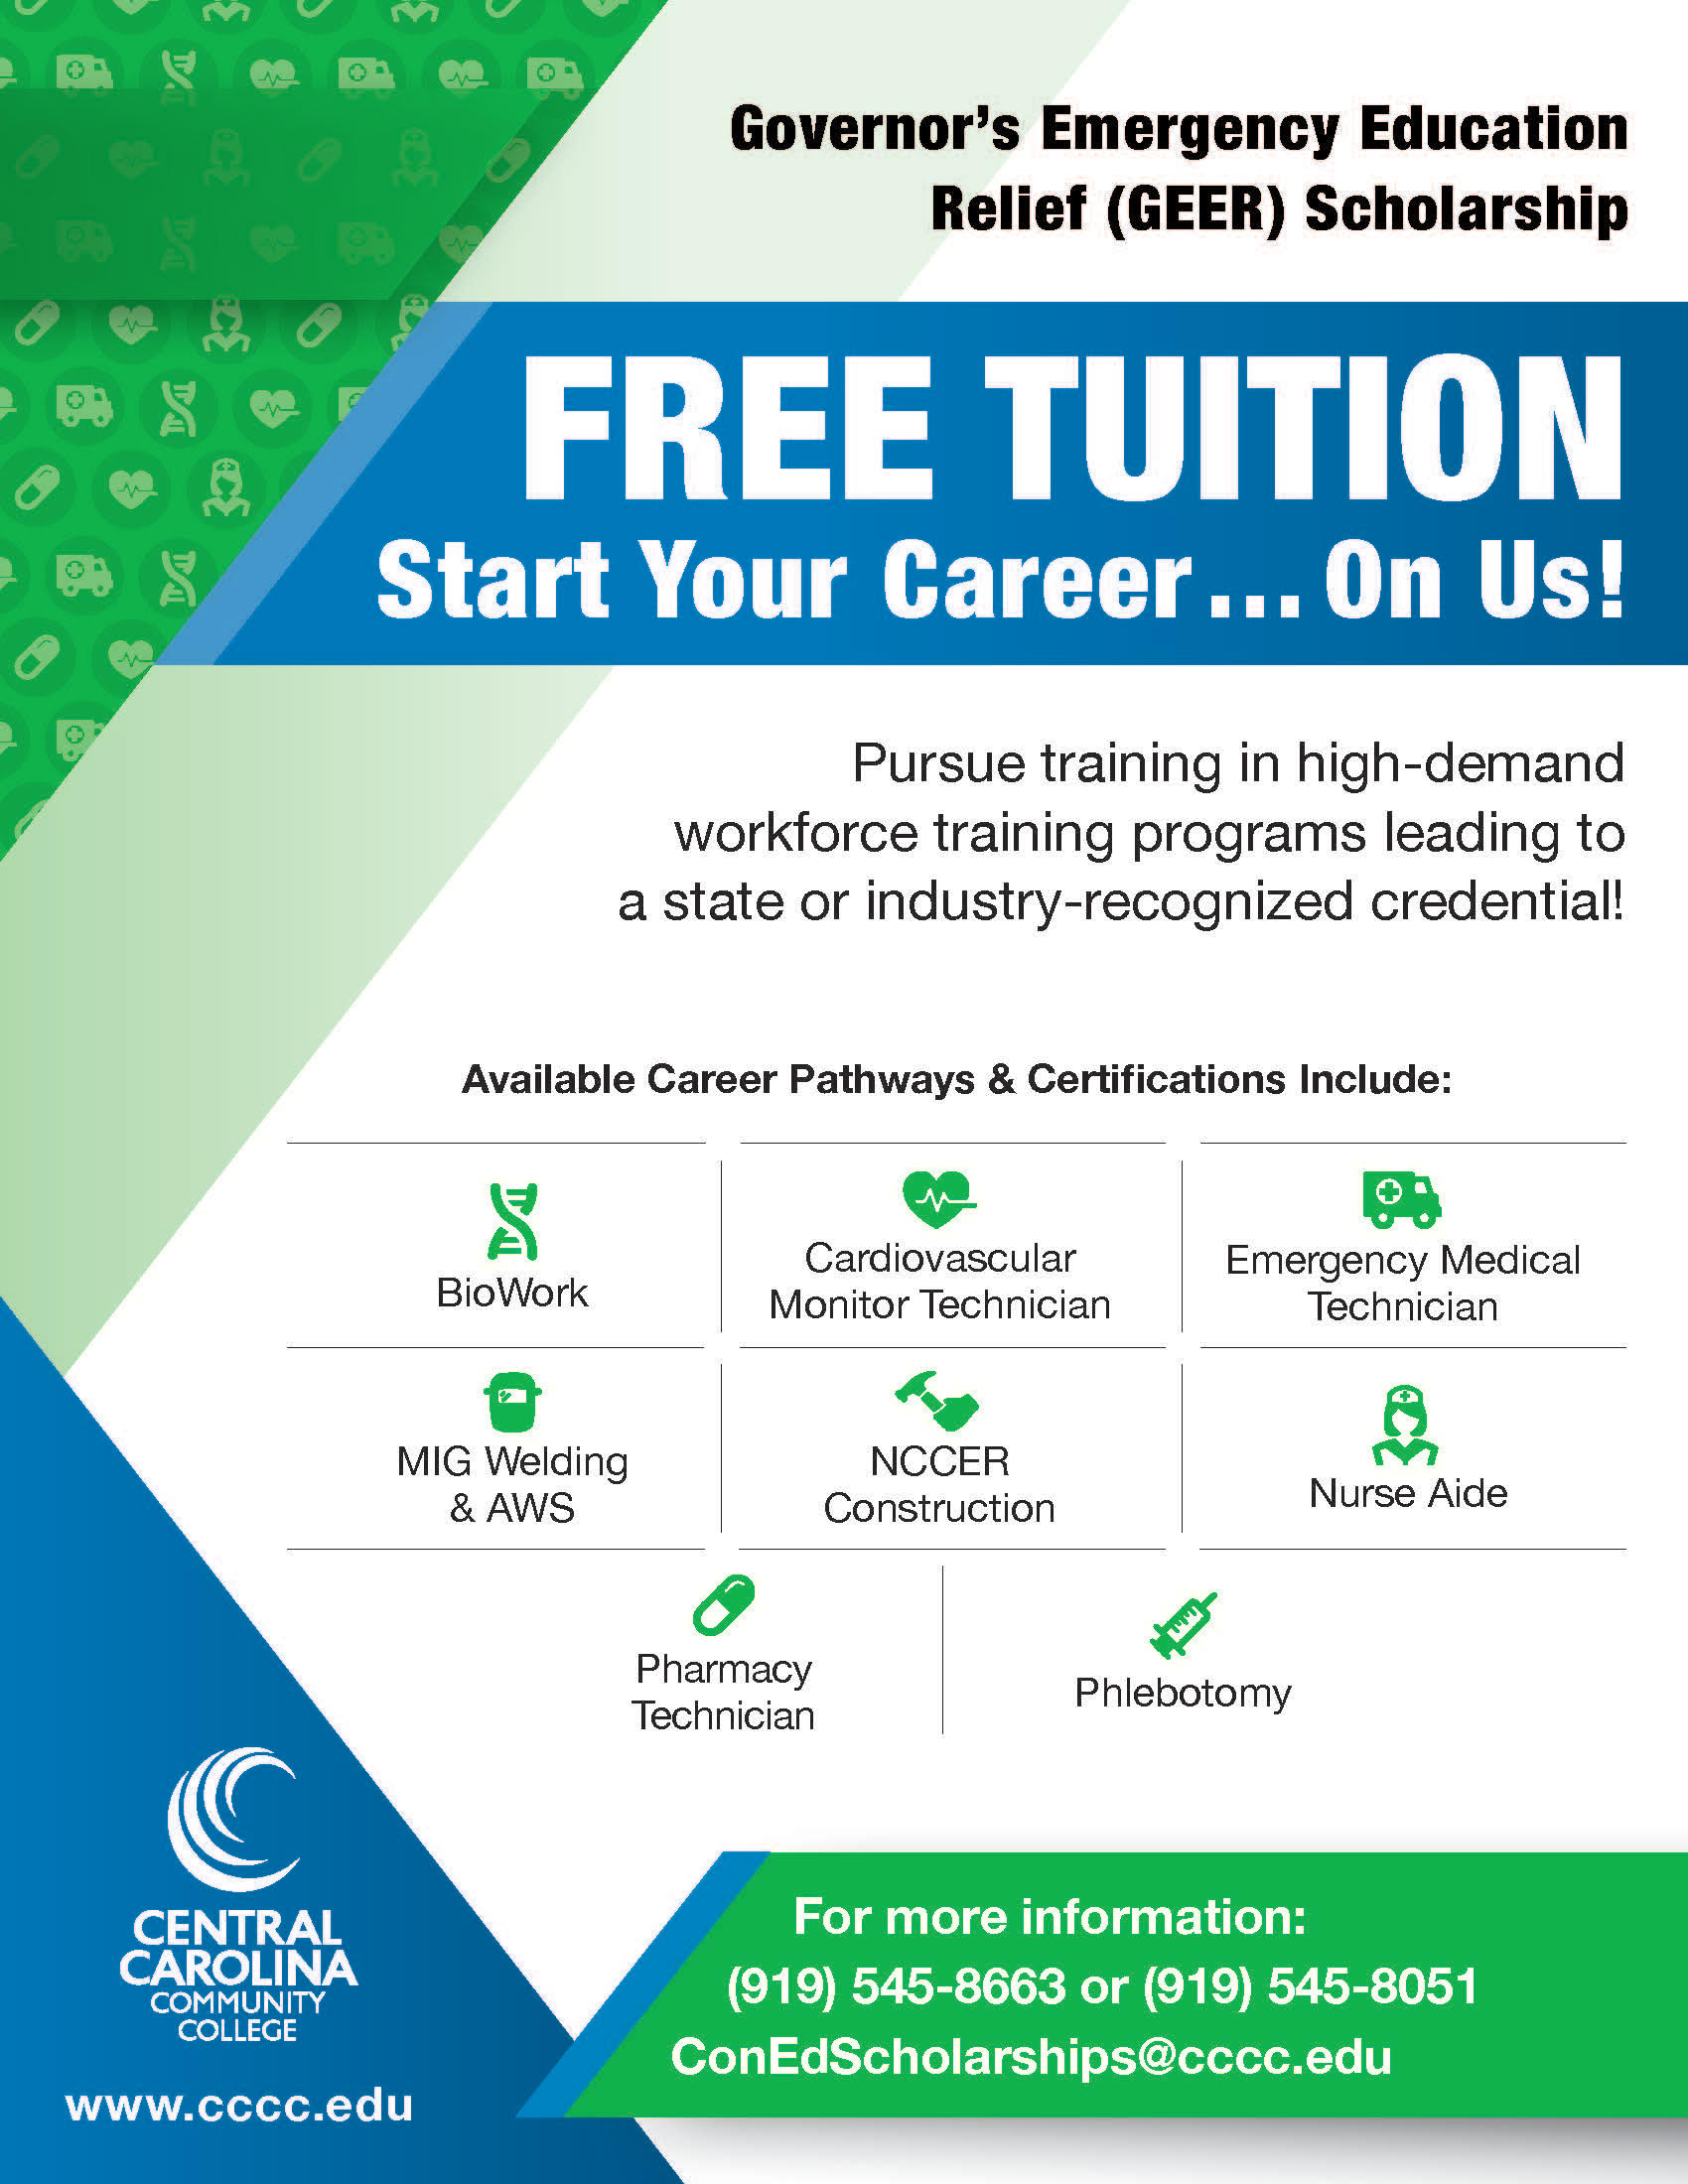 Read the full story, Free tuition for selected workforce training programs at CCCC